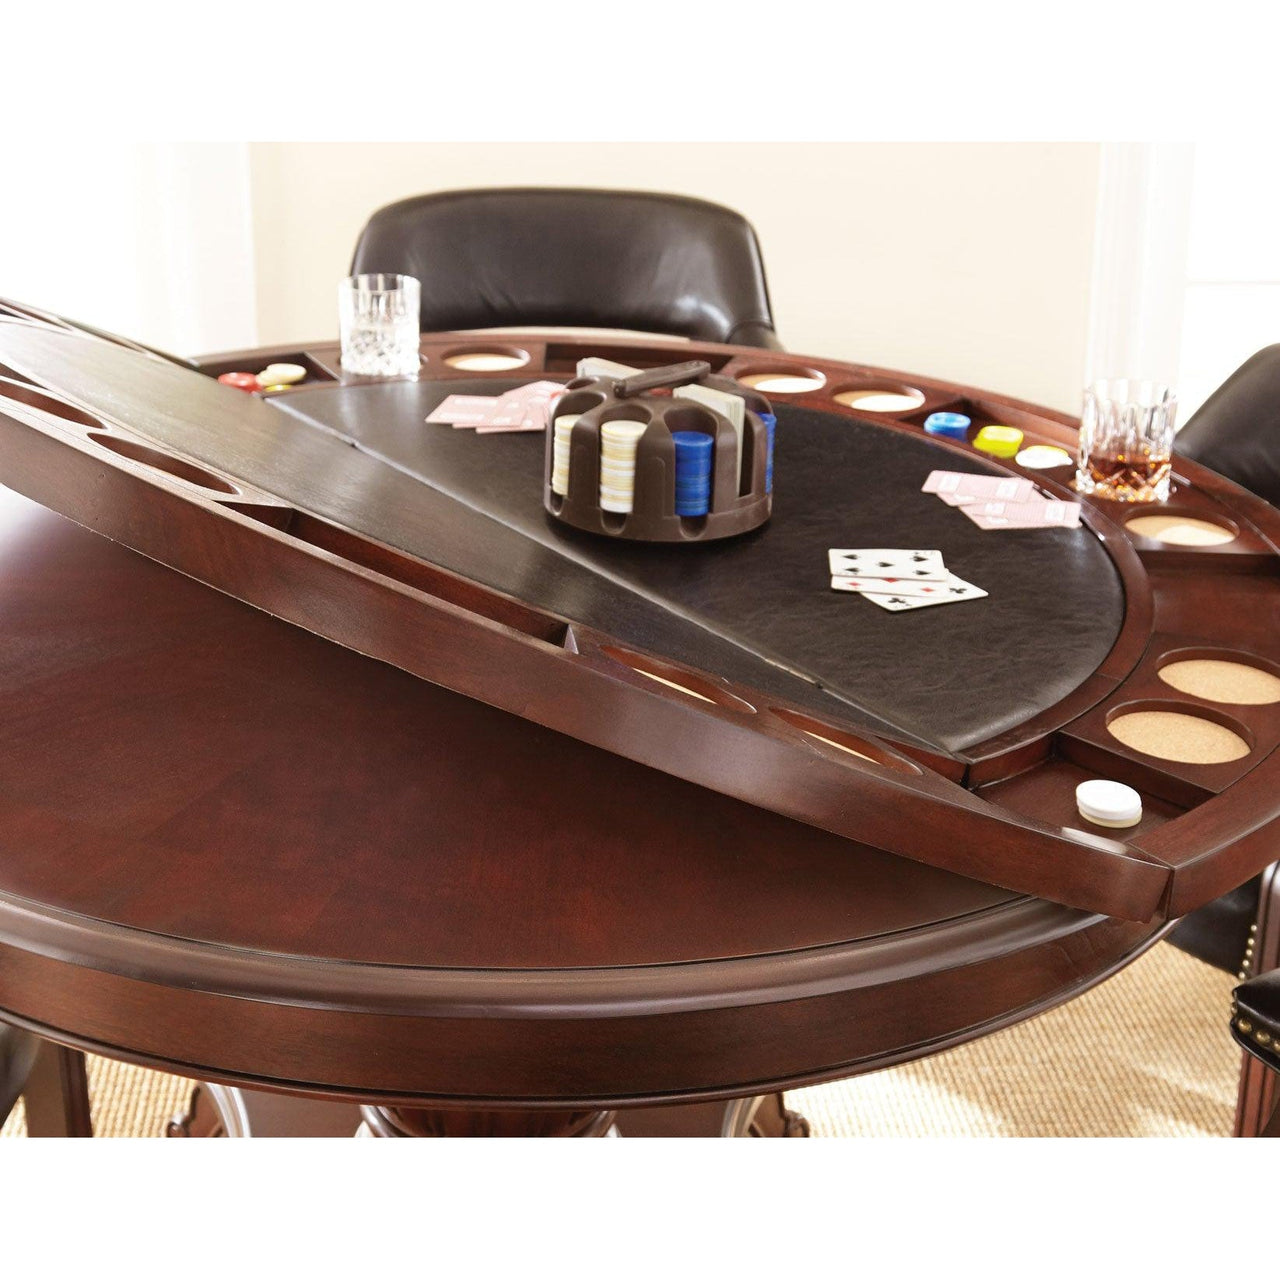 Convertible Poker Table Set Tournament in Black with matching Chairs-AMERICANA-POKER-TABLES